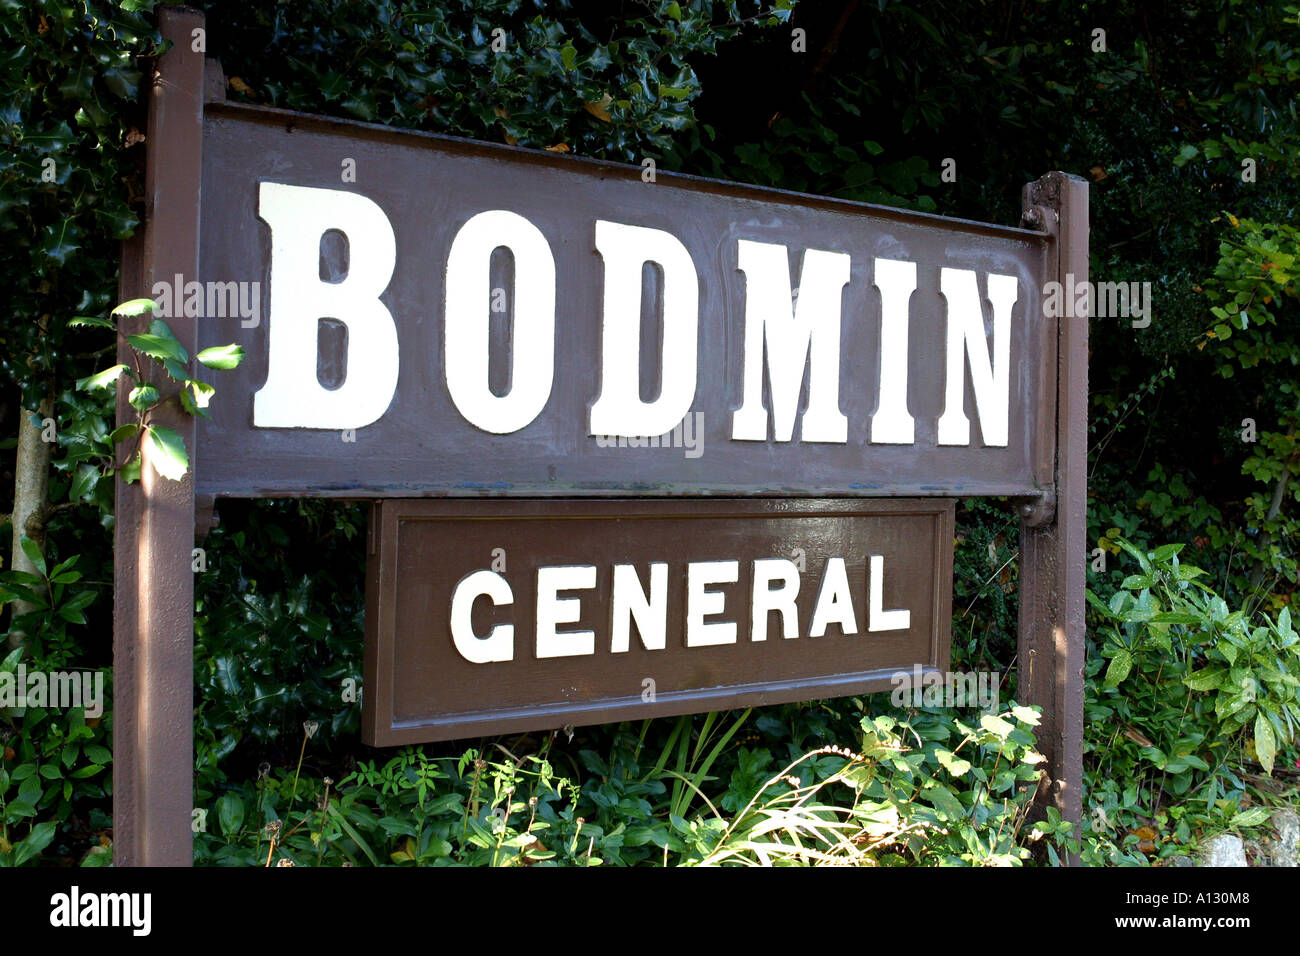 Station sign Bodmin & Wenford Steam Railway Cornwall Stock Photo